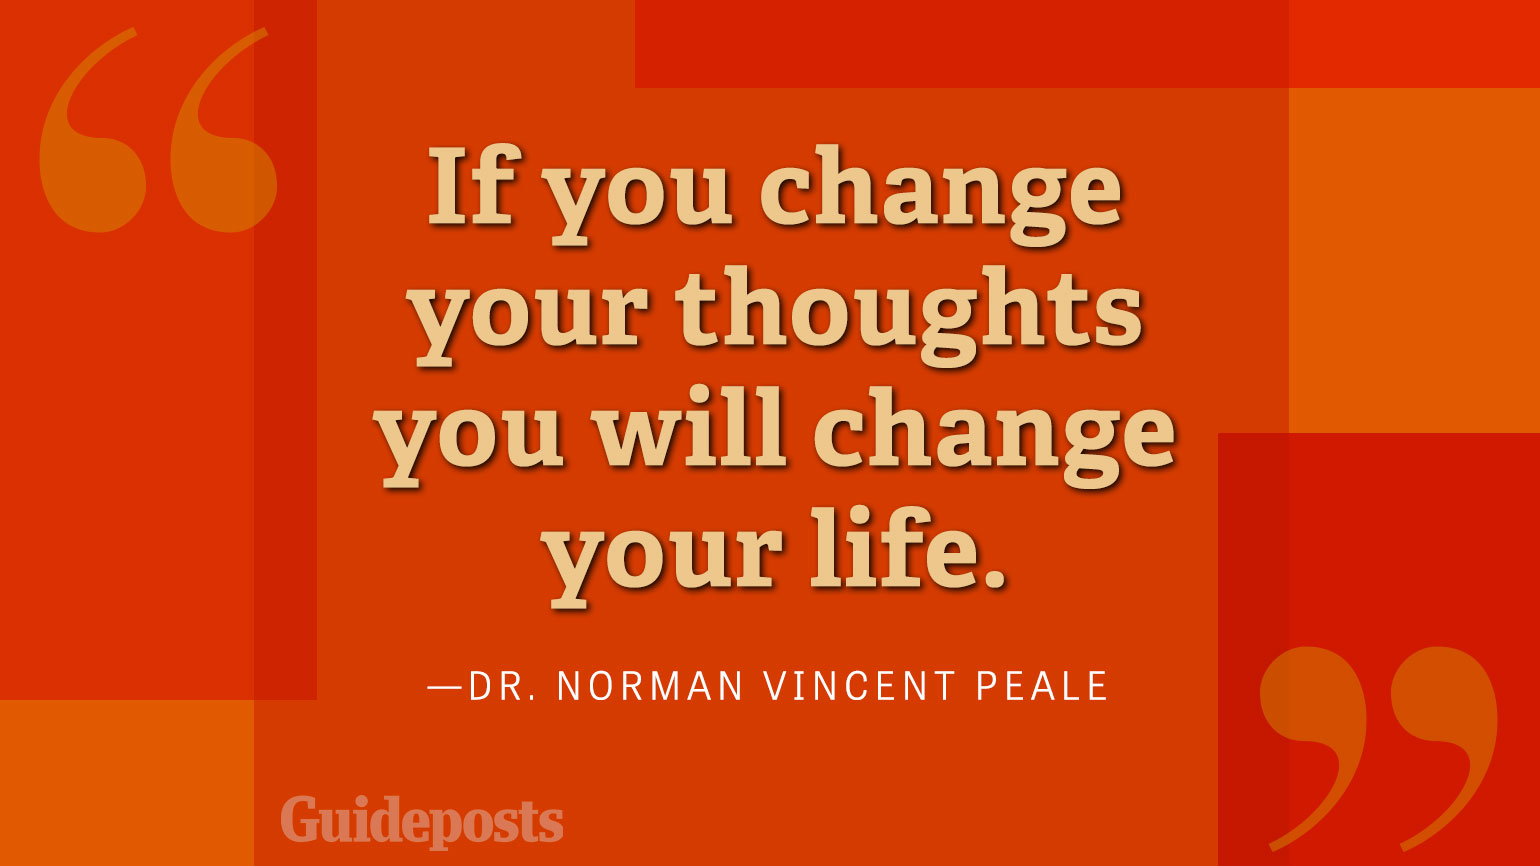 If you change your thoughts you will change your life.